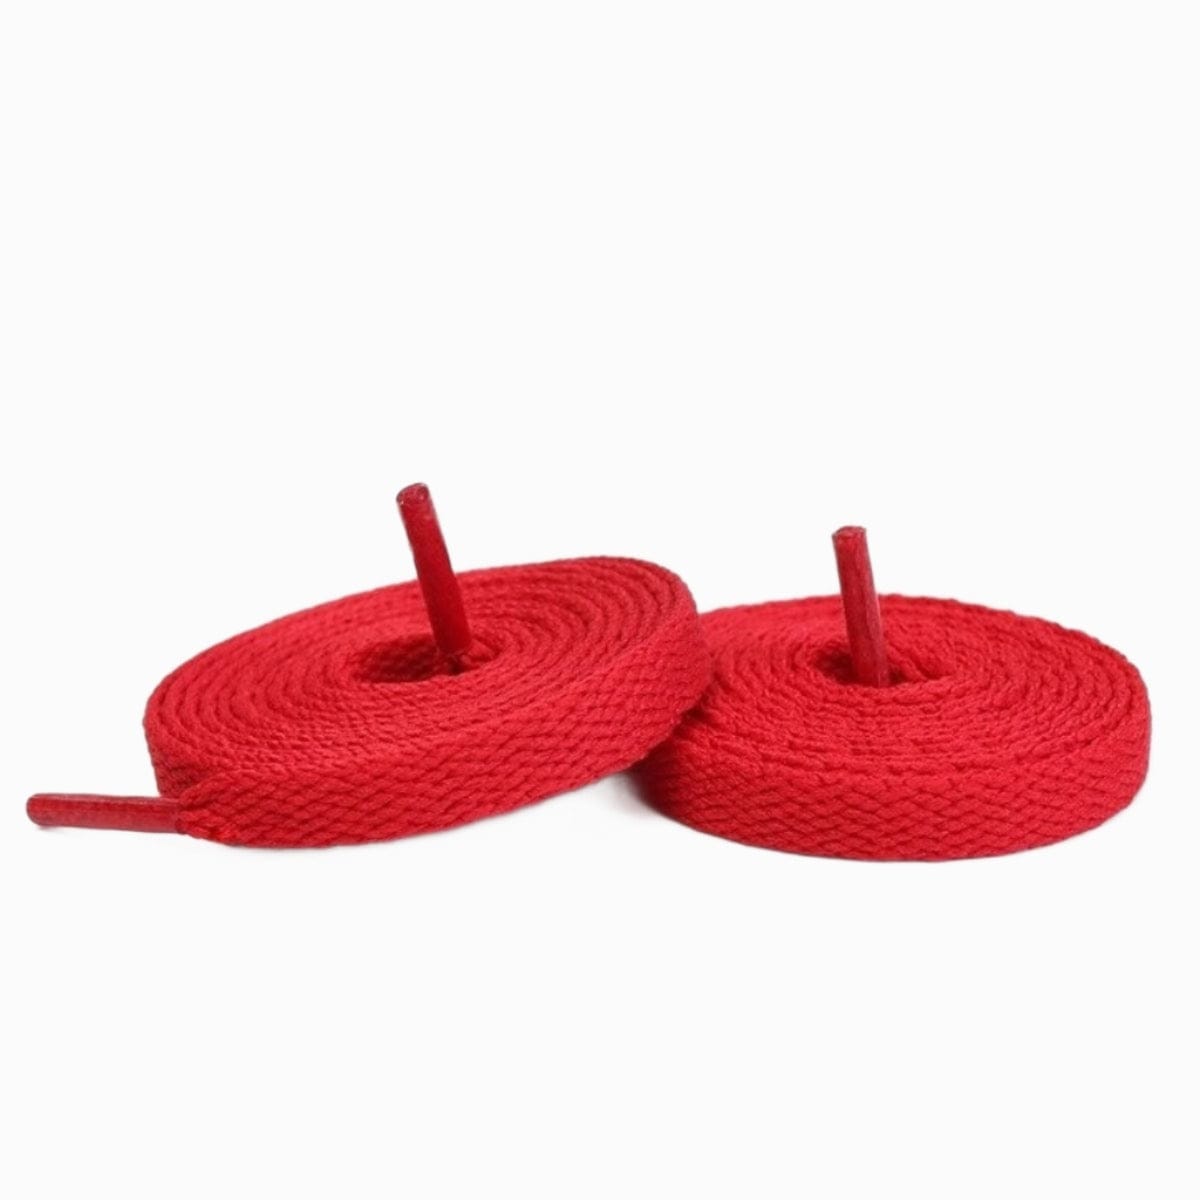 Red Replacement Shoe Laces for Adidas Handball Spezial Sneakers by Kicks Shoelaces